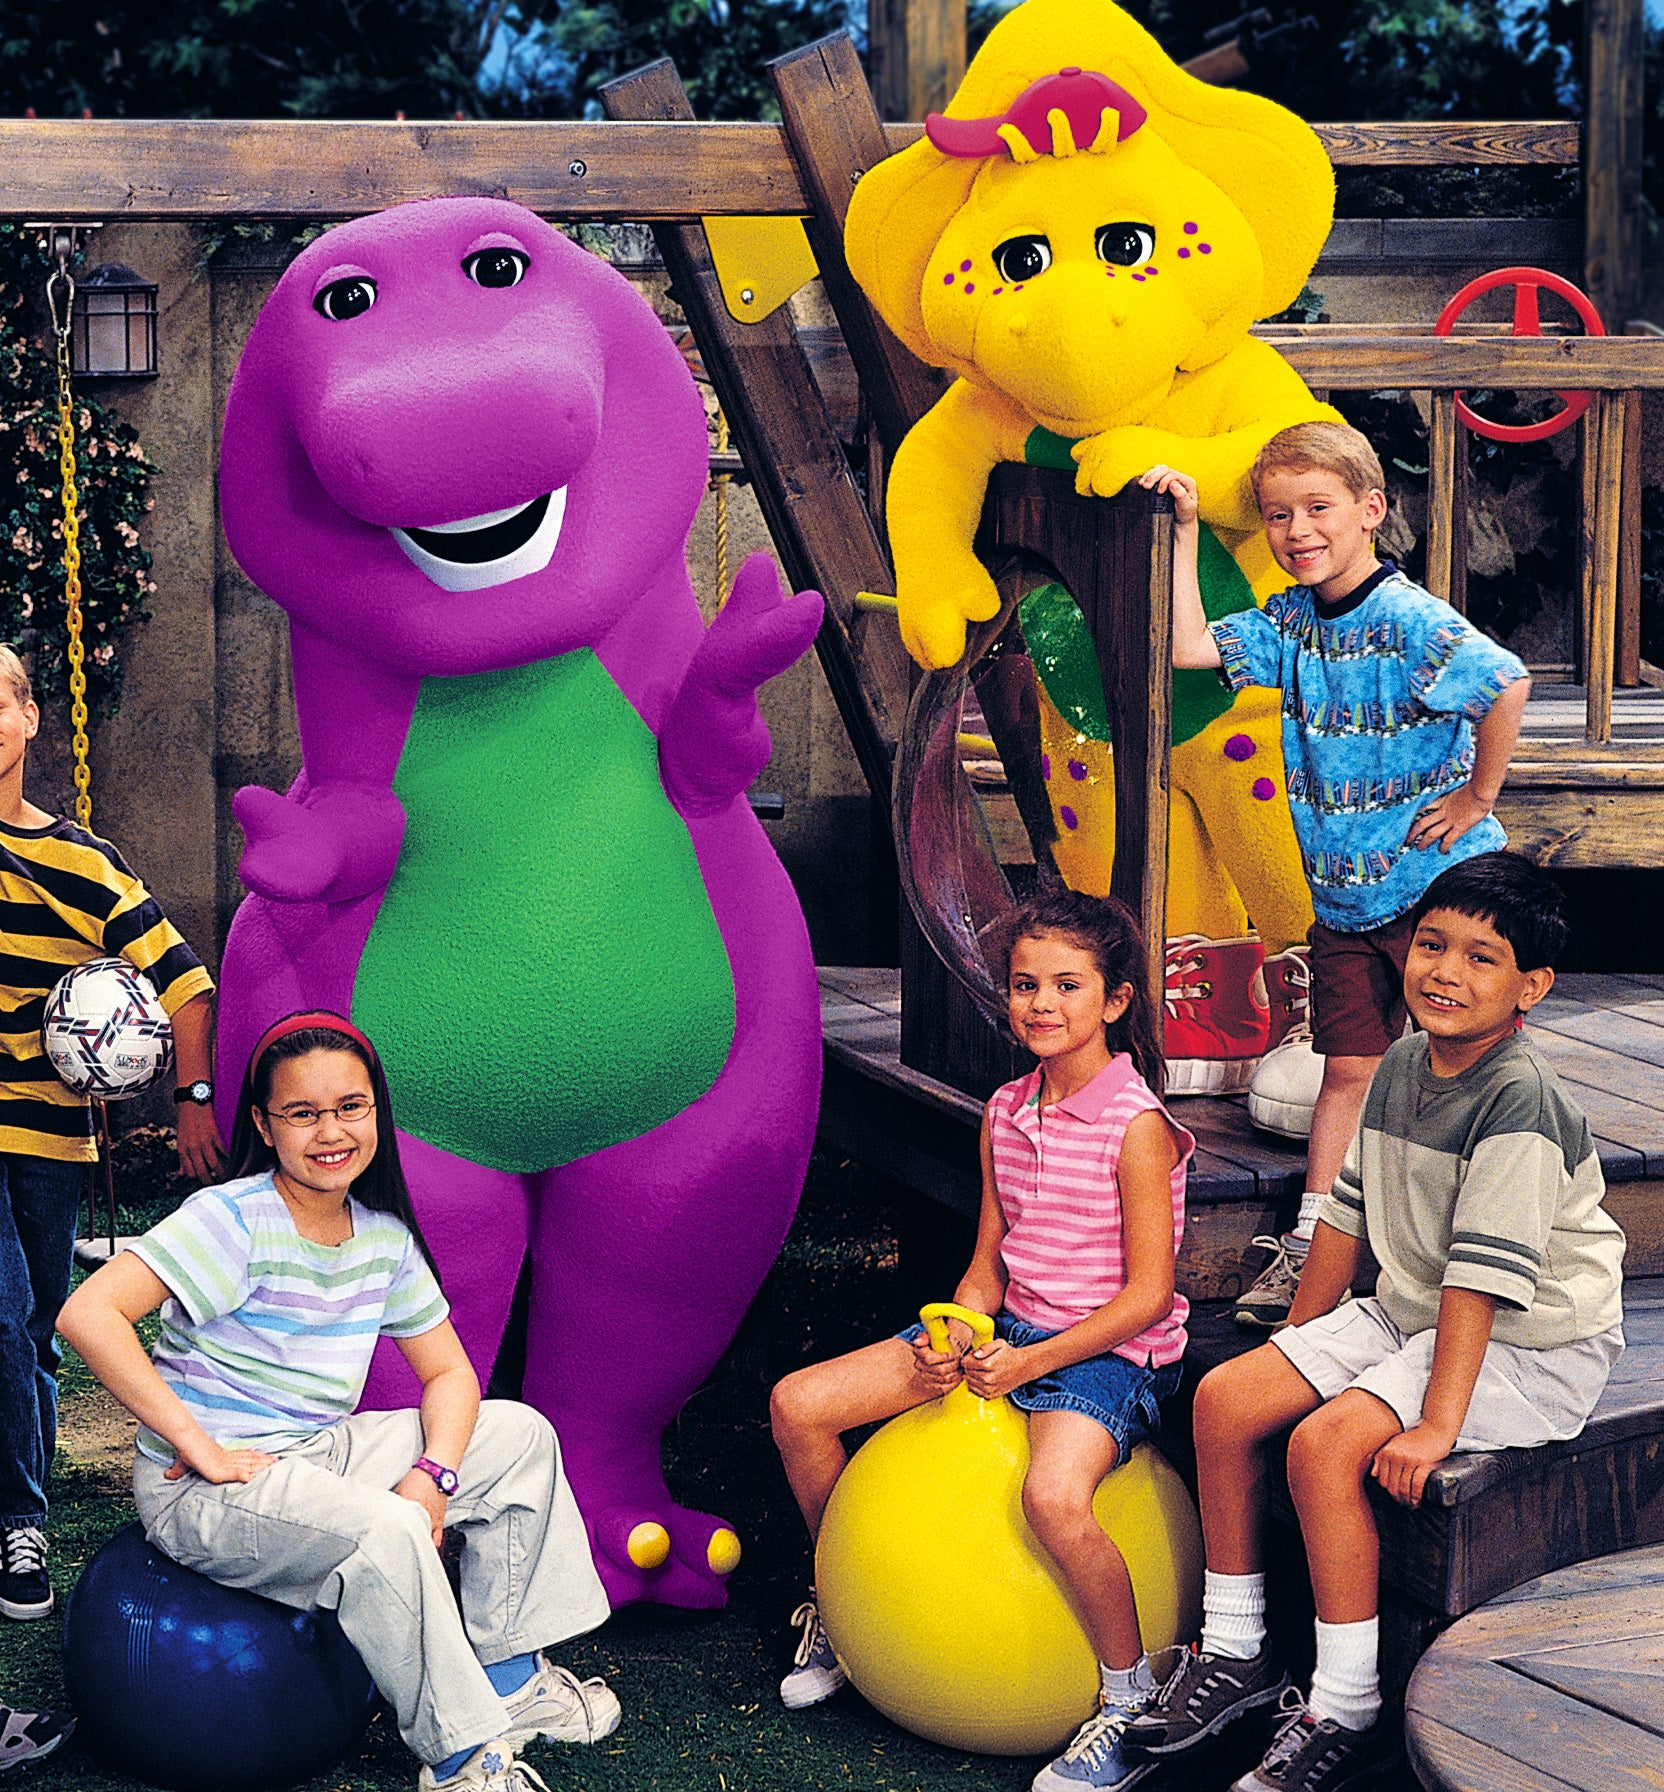 Group of children posing with Barney the Dinosaur and friends BJ and Baby Bop on a playground